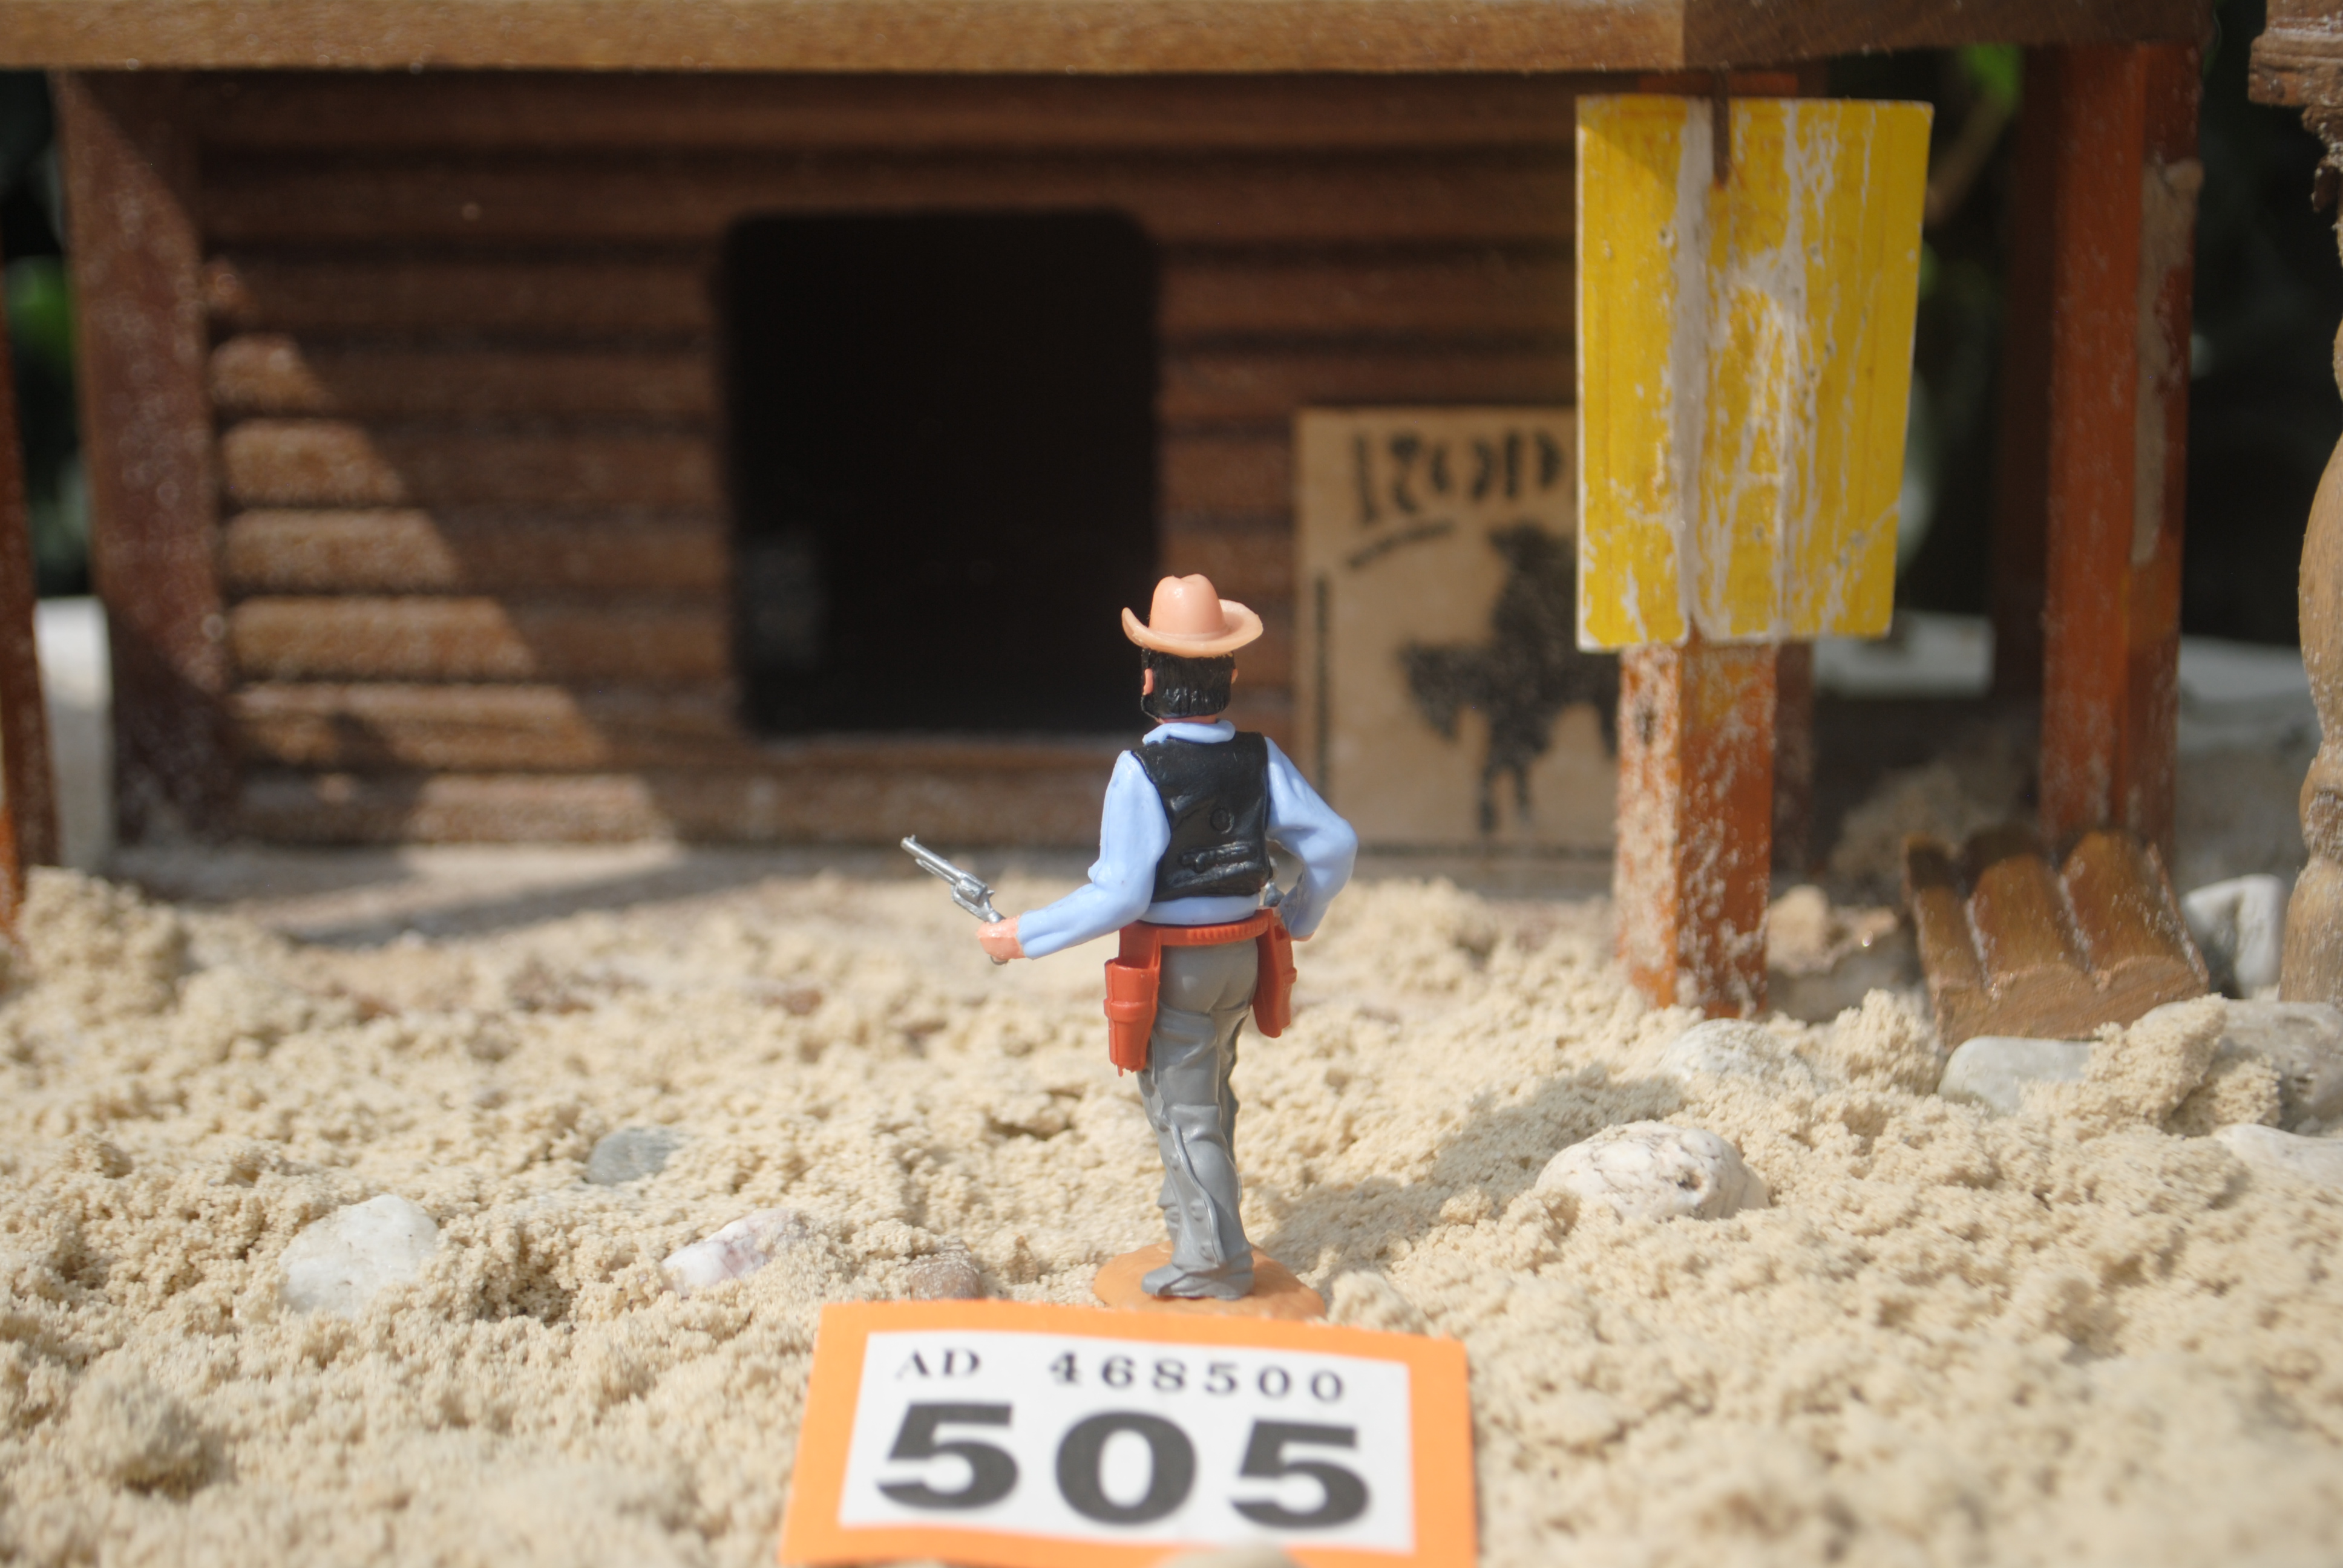 Timpo Toys O.505 Cowboy Standing 4th version